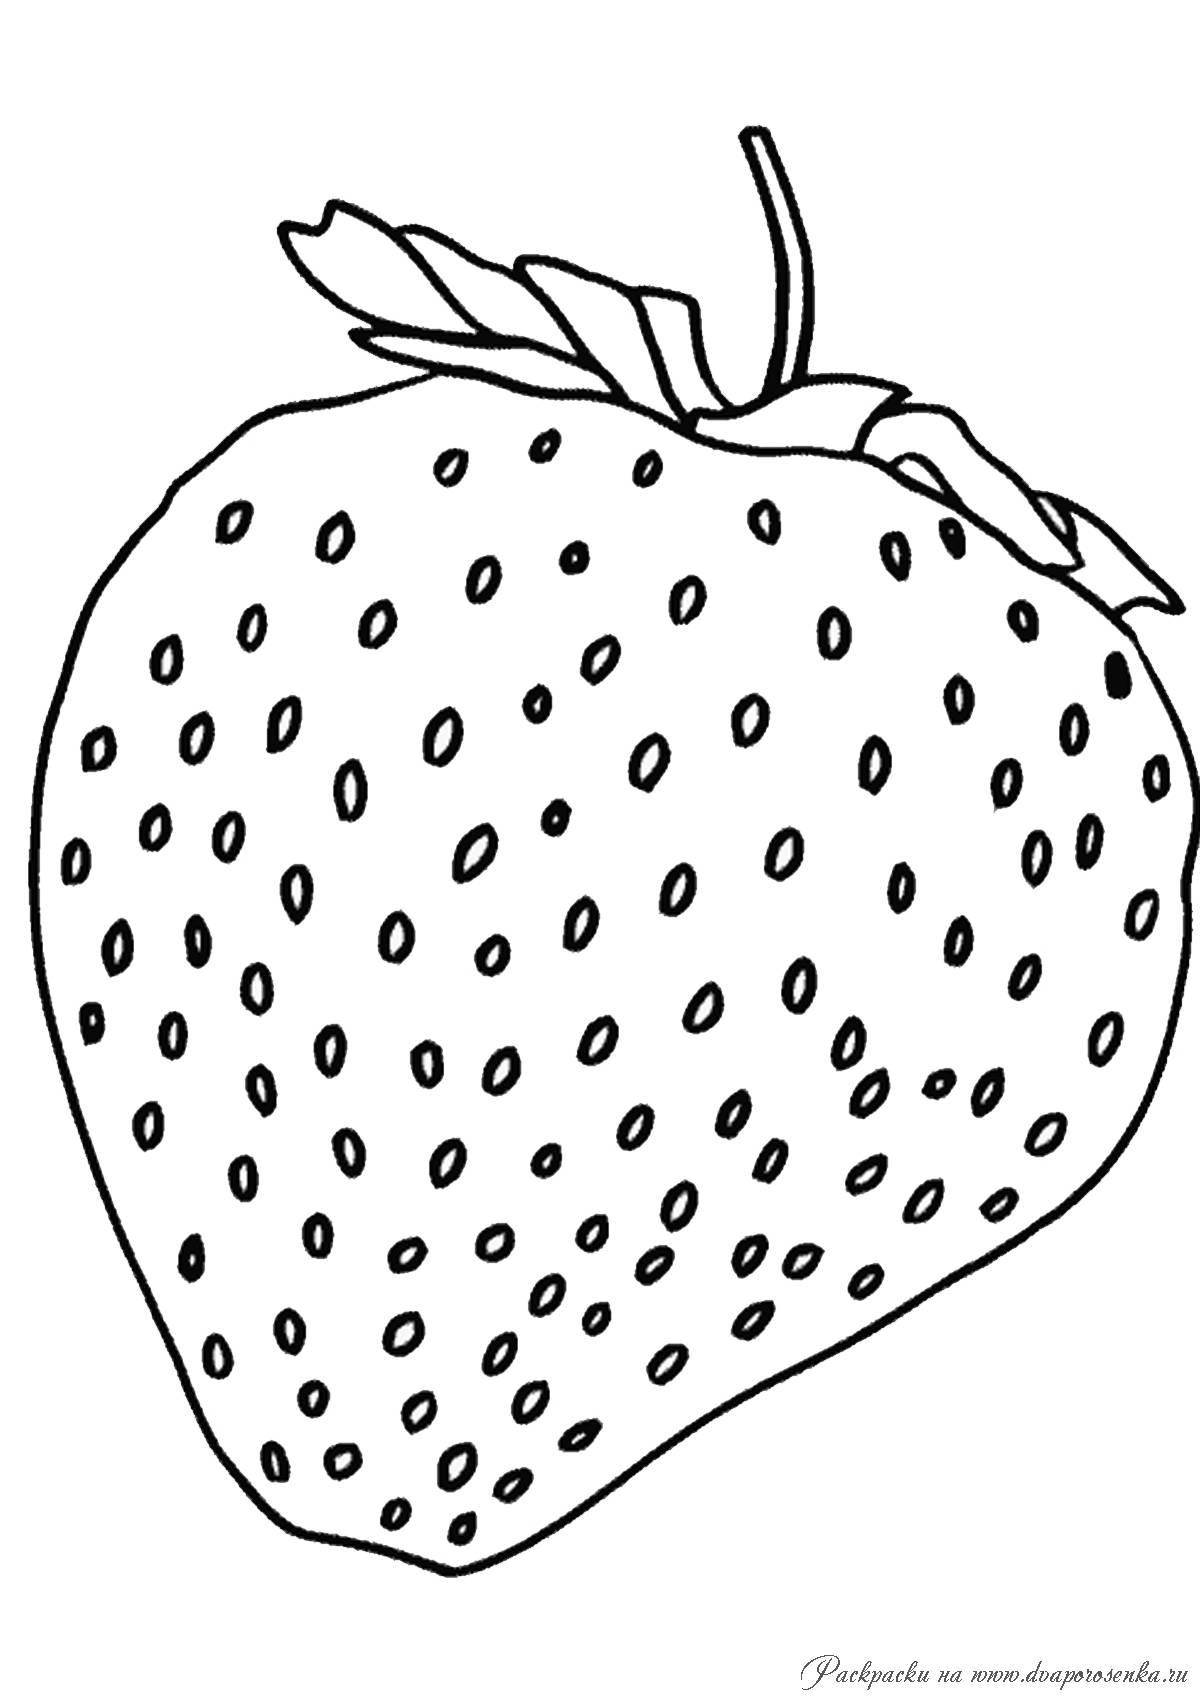 Impressive strawberry coloring book for kids 5-6 years old